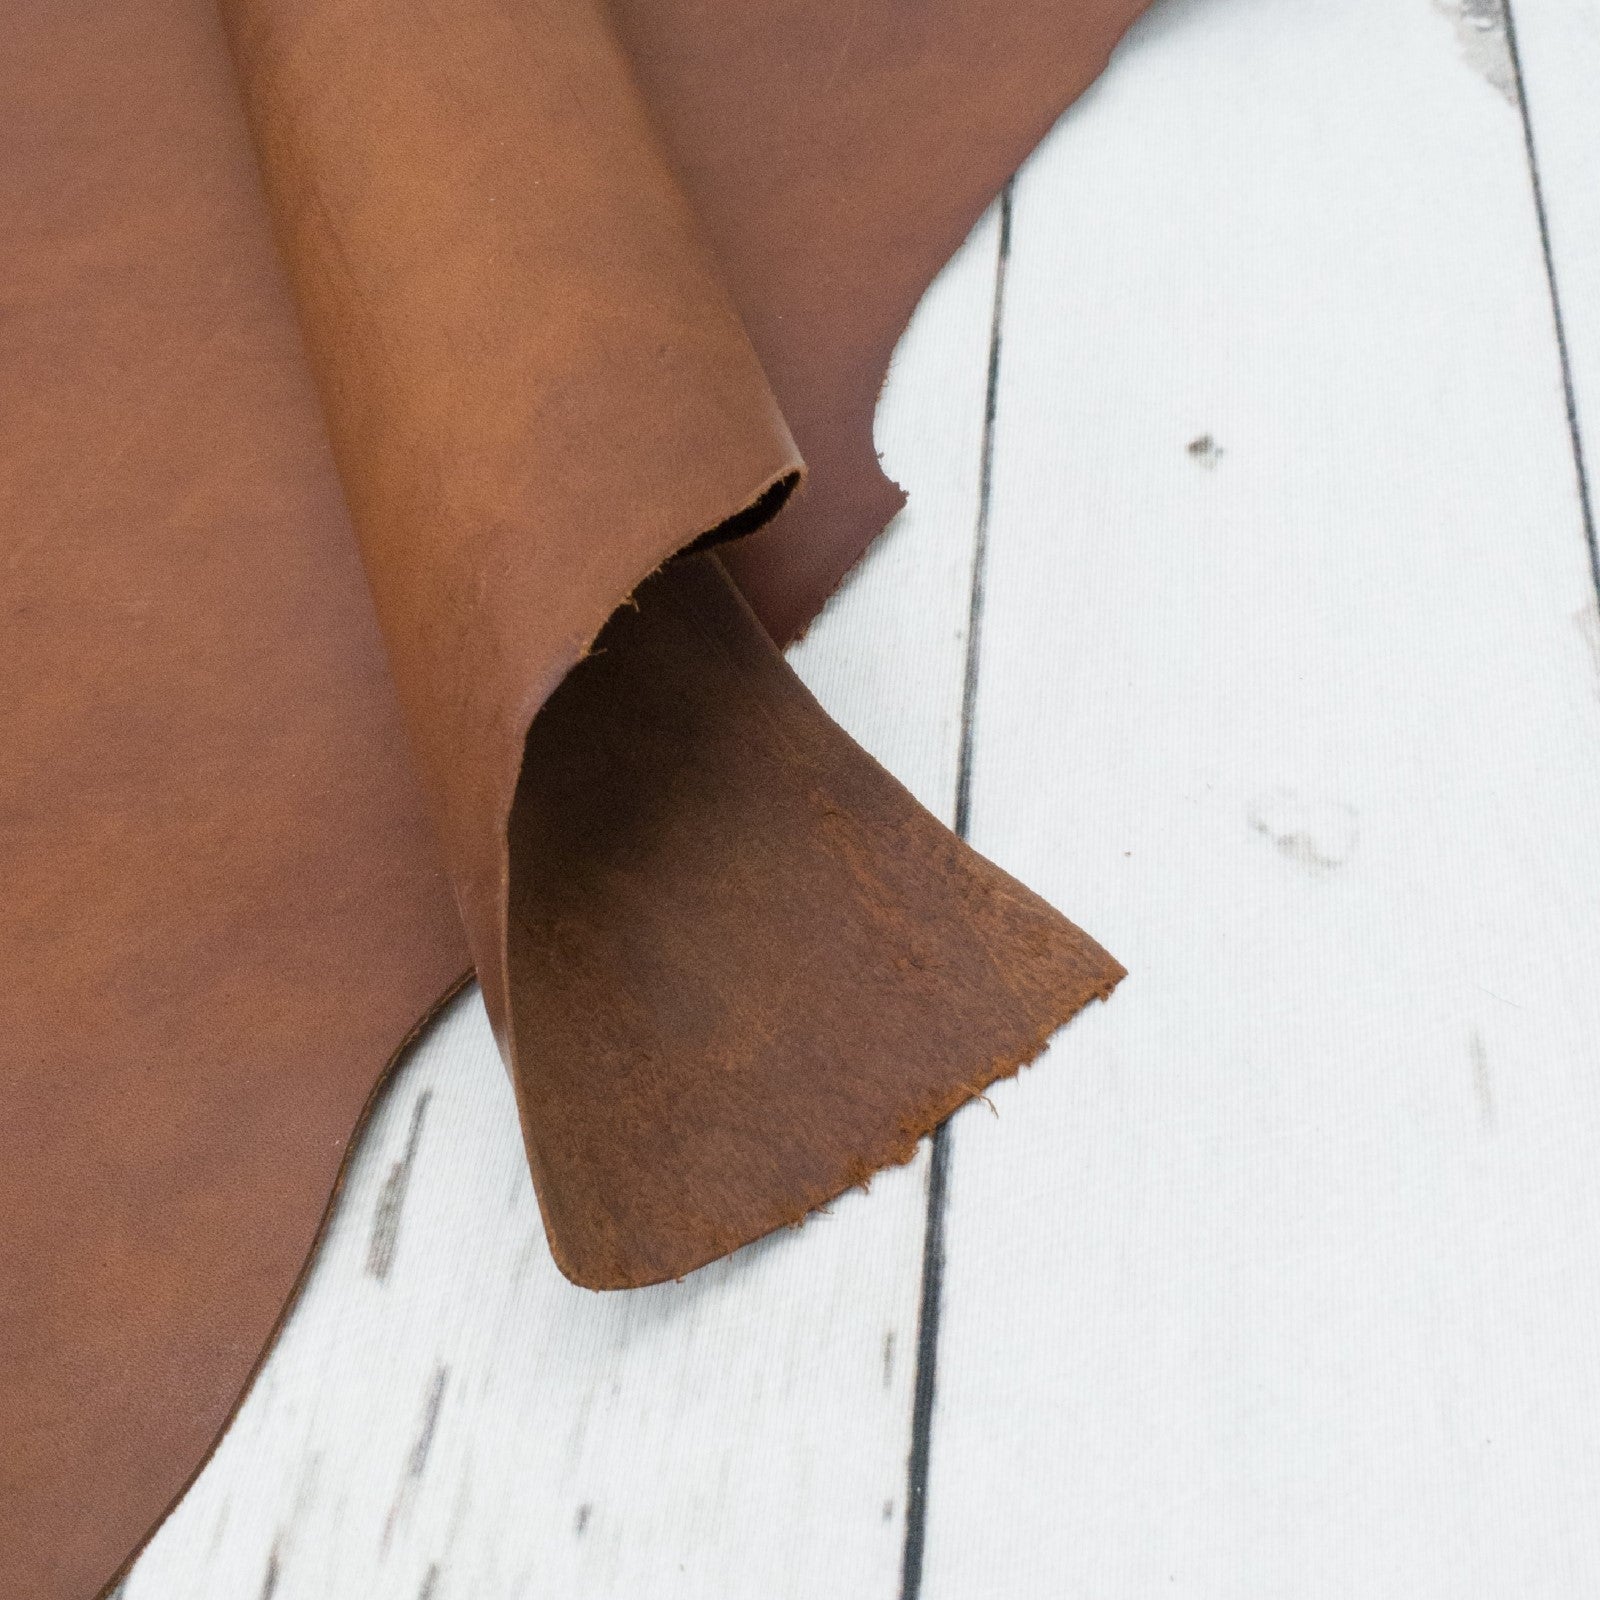 Kangaroo Tobacco Dyed Veg Tanned 5 - 7 Sq Ft Hides 2-3 oz,  | The Leather Guy